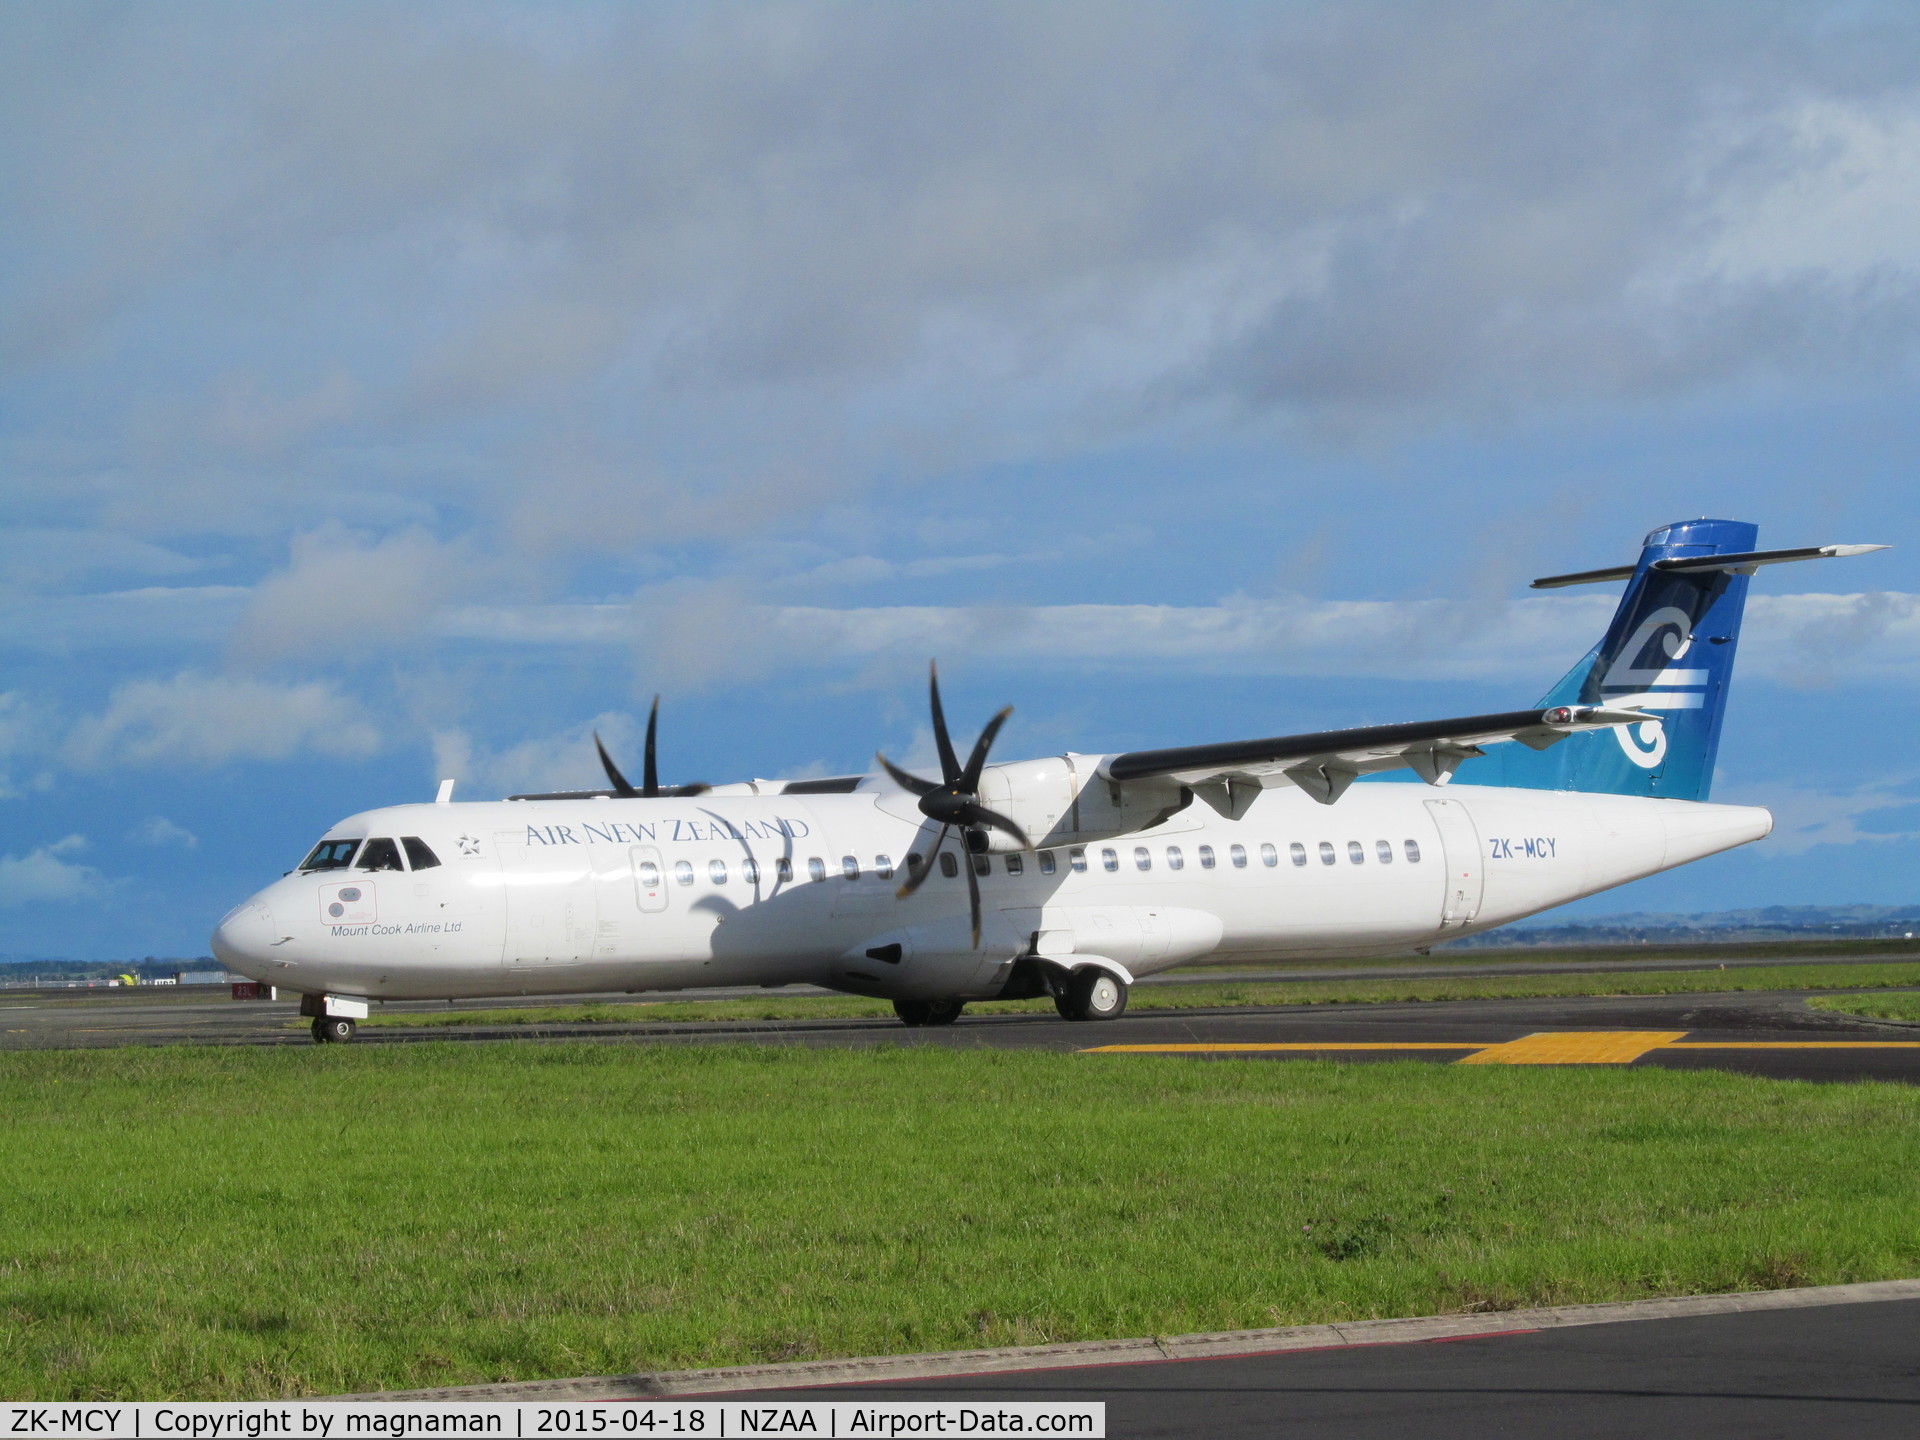 ZK-MCY, 2003 ATR 72-212A C/N 703, on way out of AKL